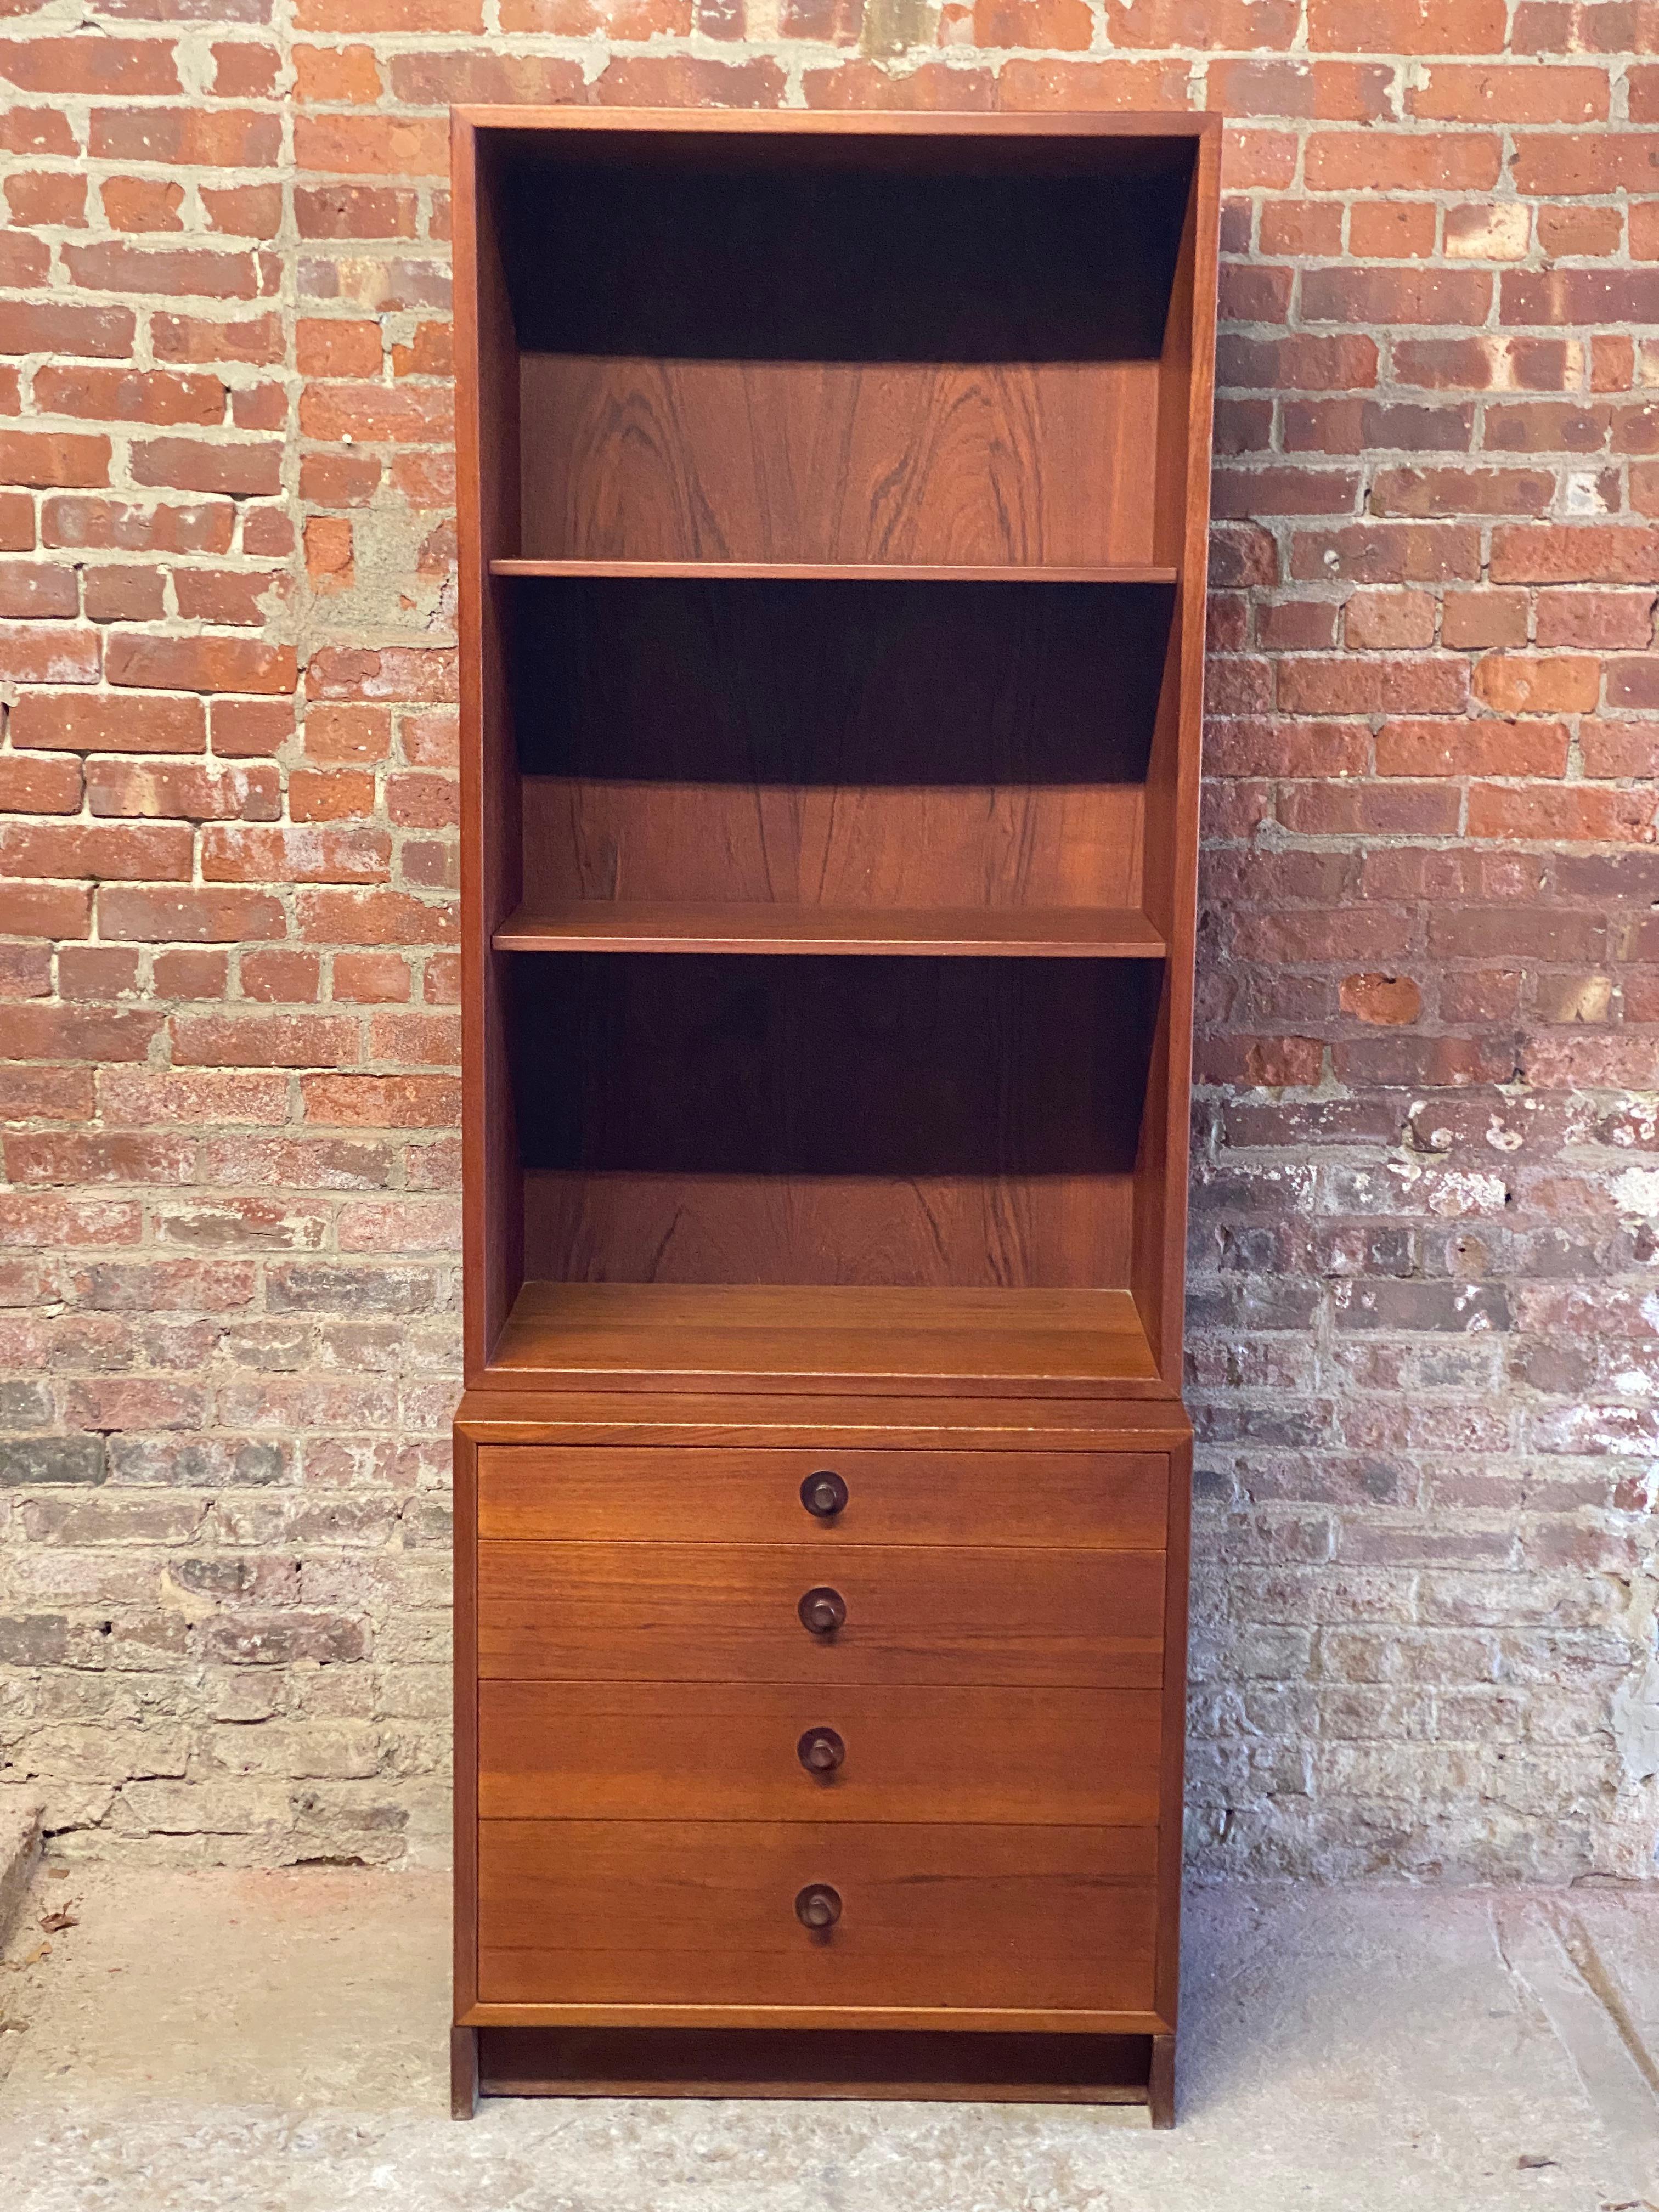 Teak Scandinavian design dresser/bookcase. Two adjustable shelves over a small four drawer cabinet. This piece has a small slim footprint that excels in any smaller apartment or living space. Refined and classic simple lines with solid darker cone